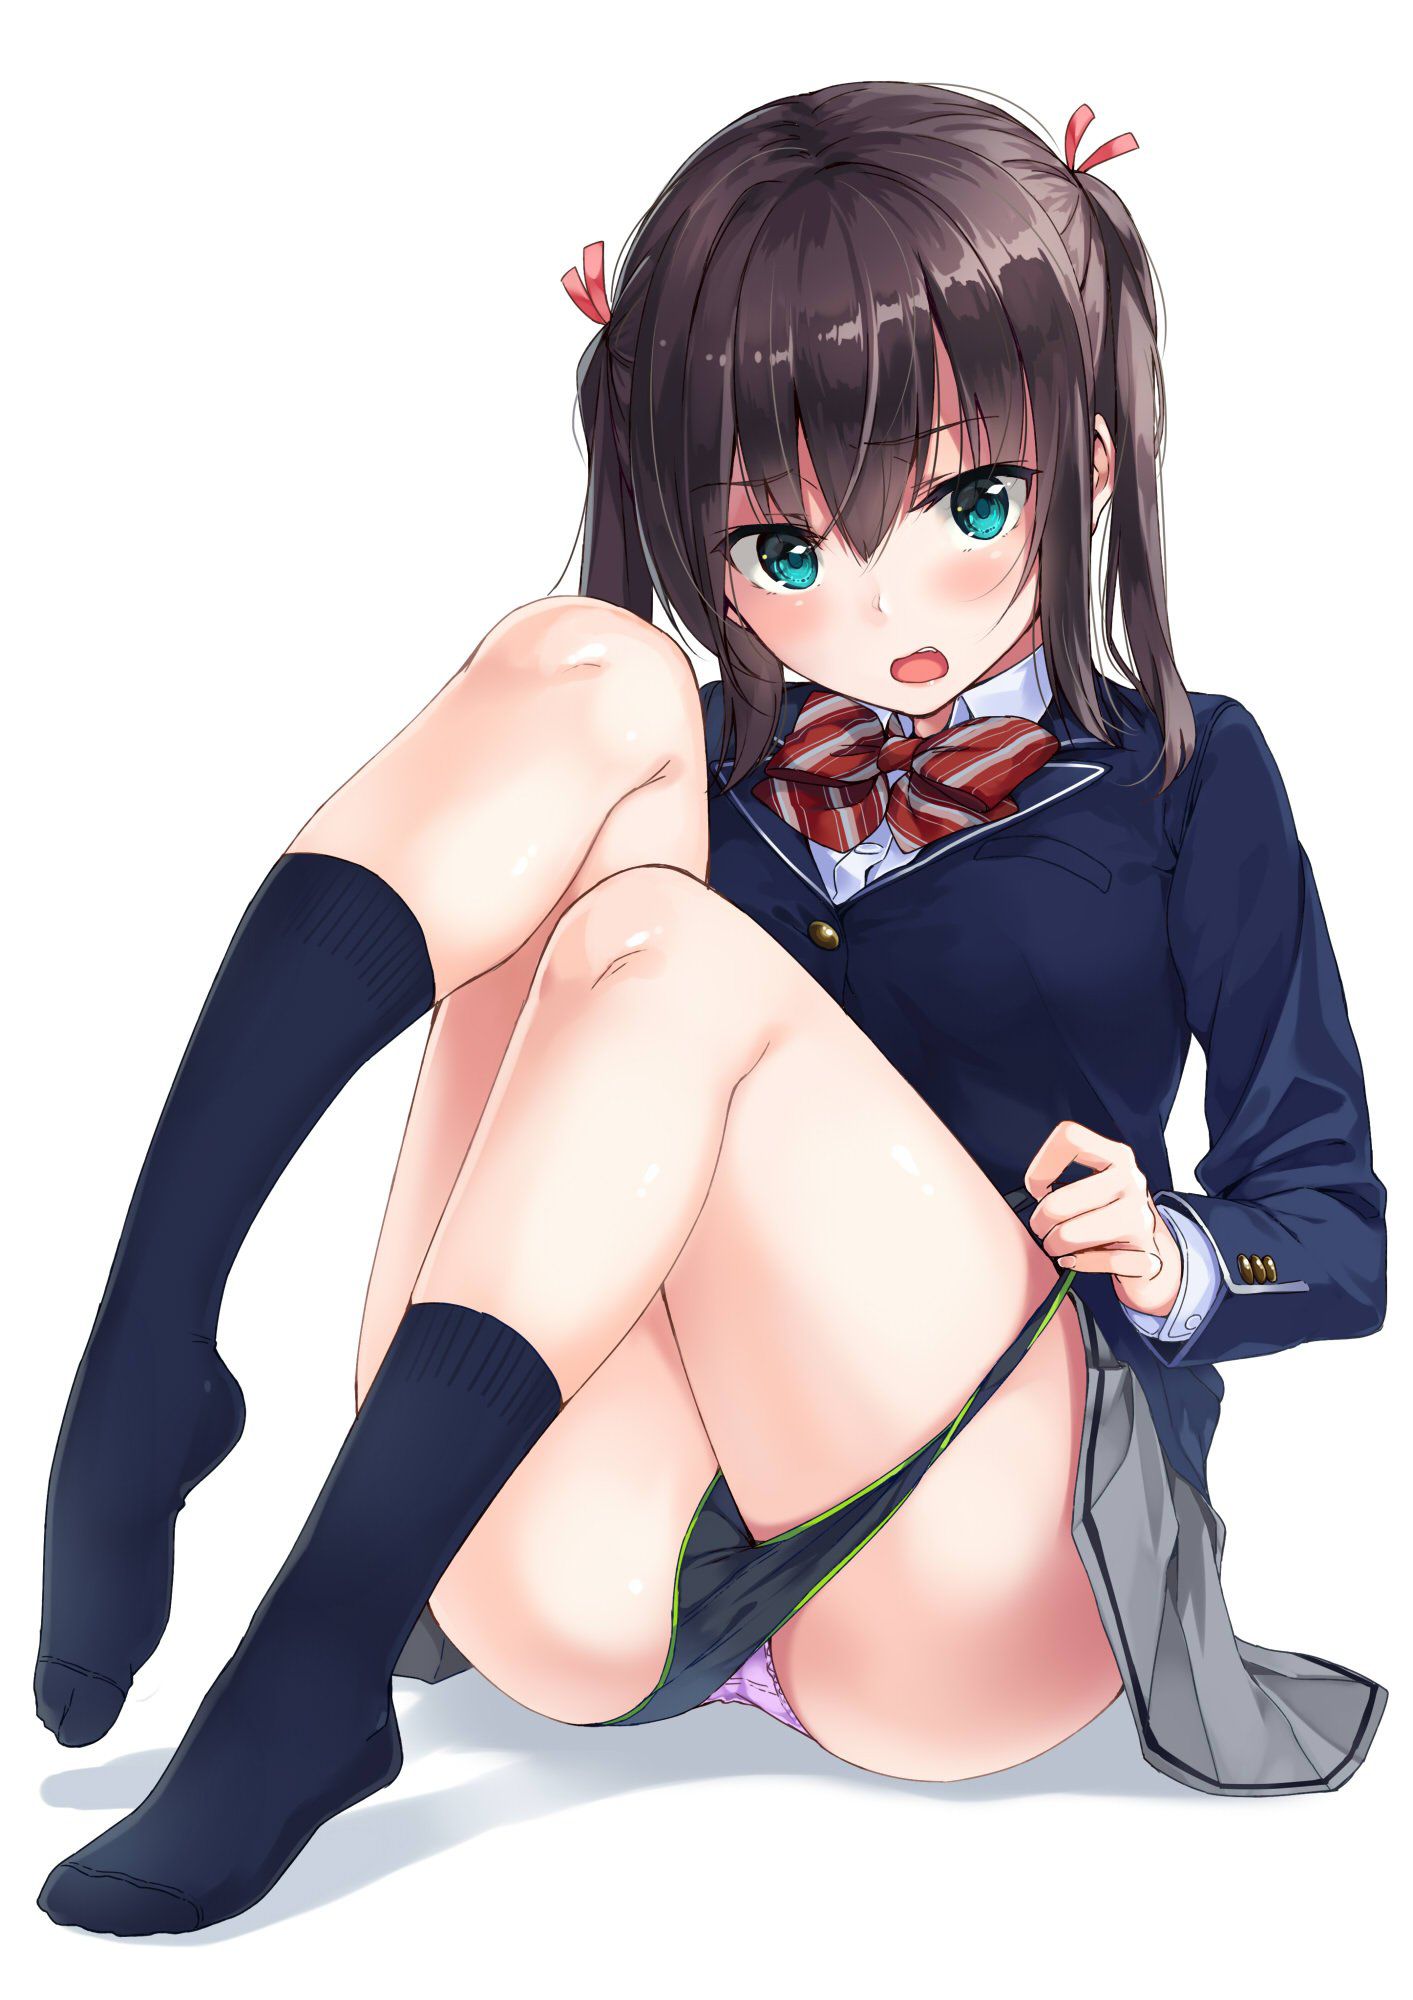 [secondary] crouch, sitting underwear image soba [part1] 2